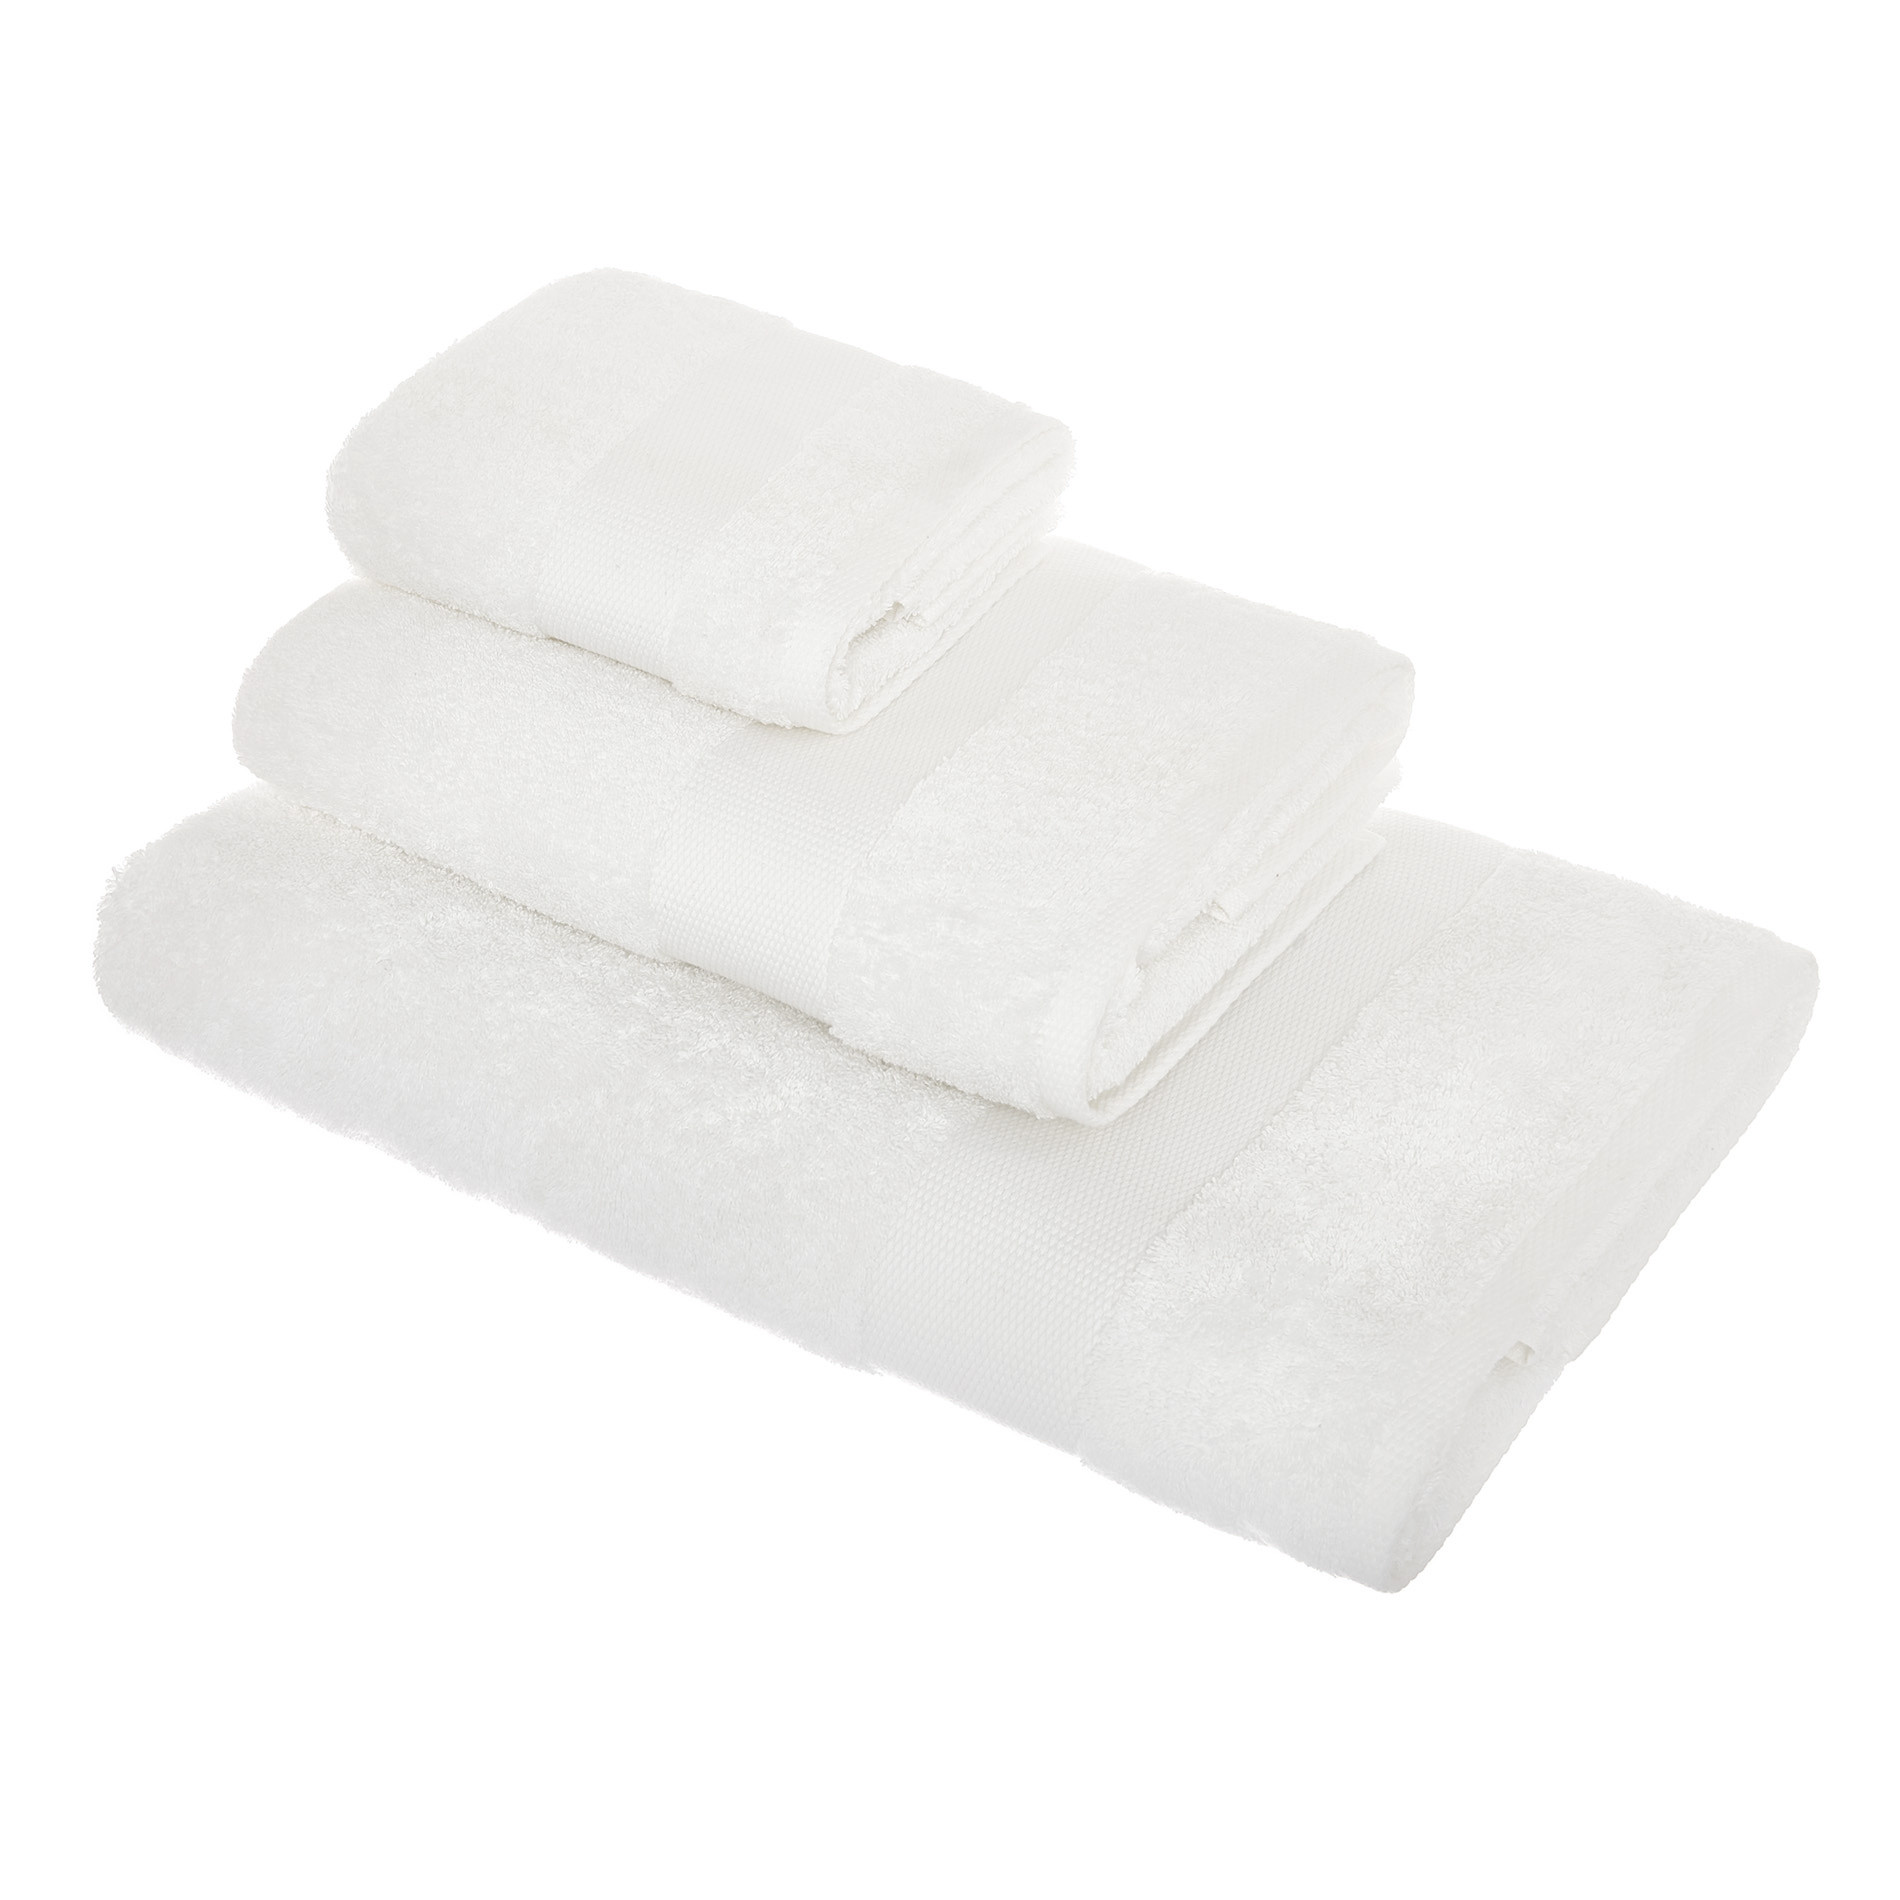 Zefiro pure cotton terry towel, White, large image number 0